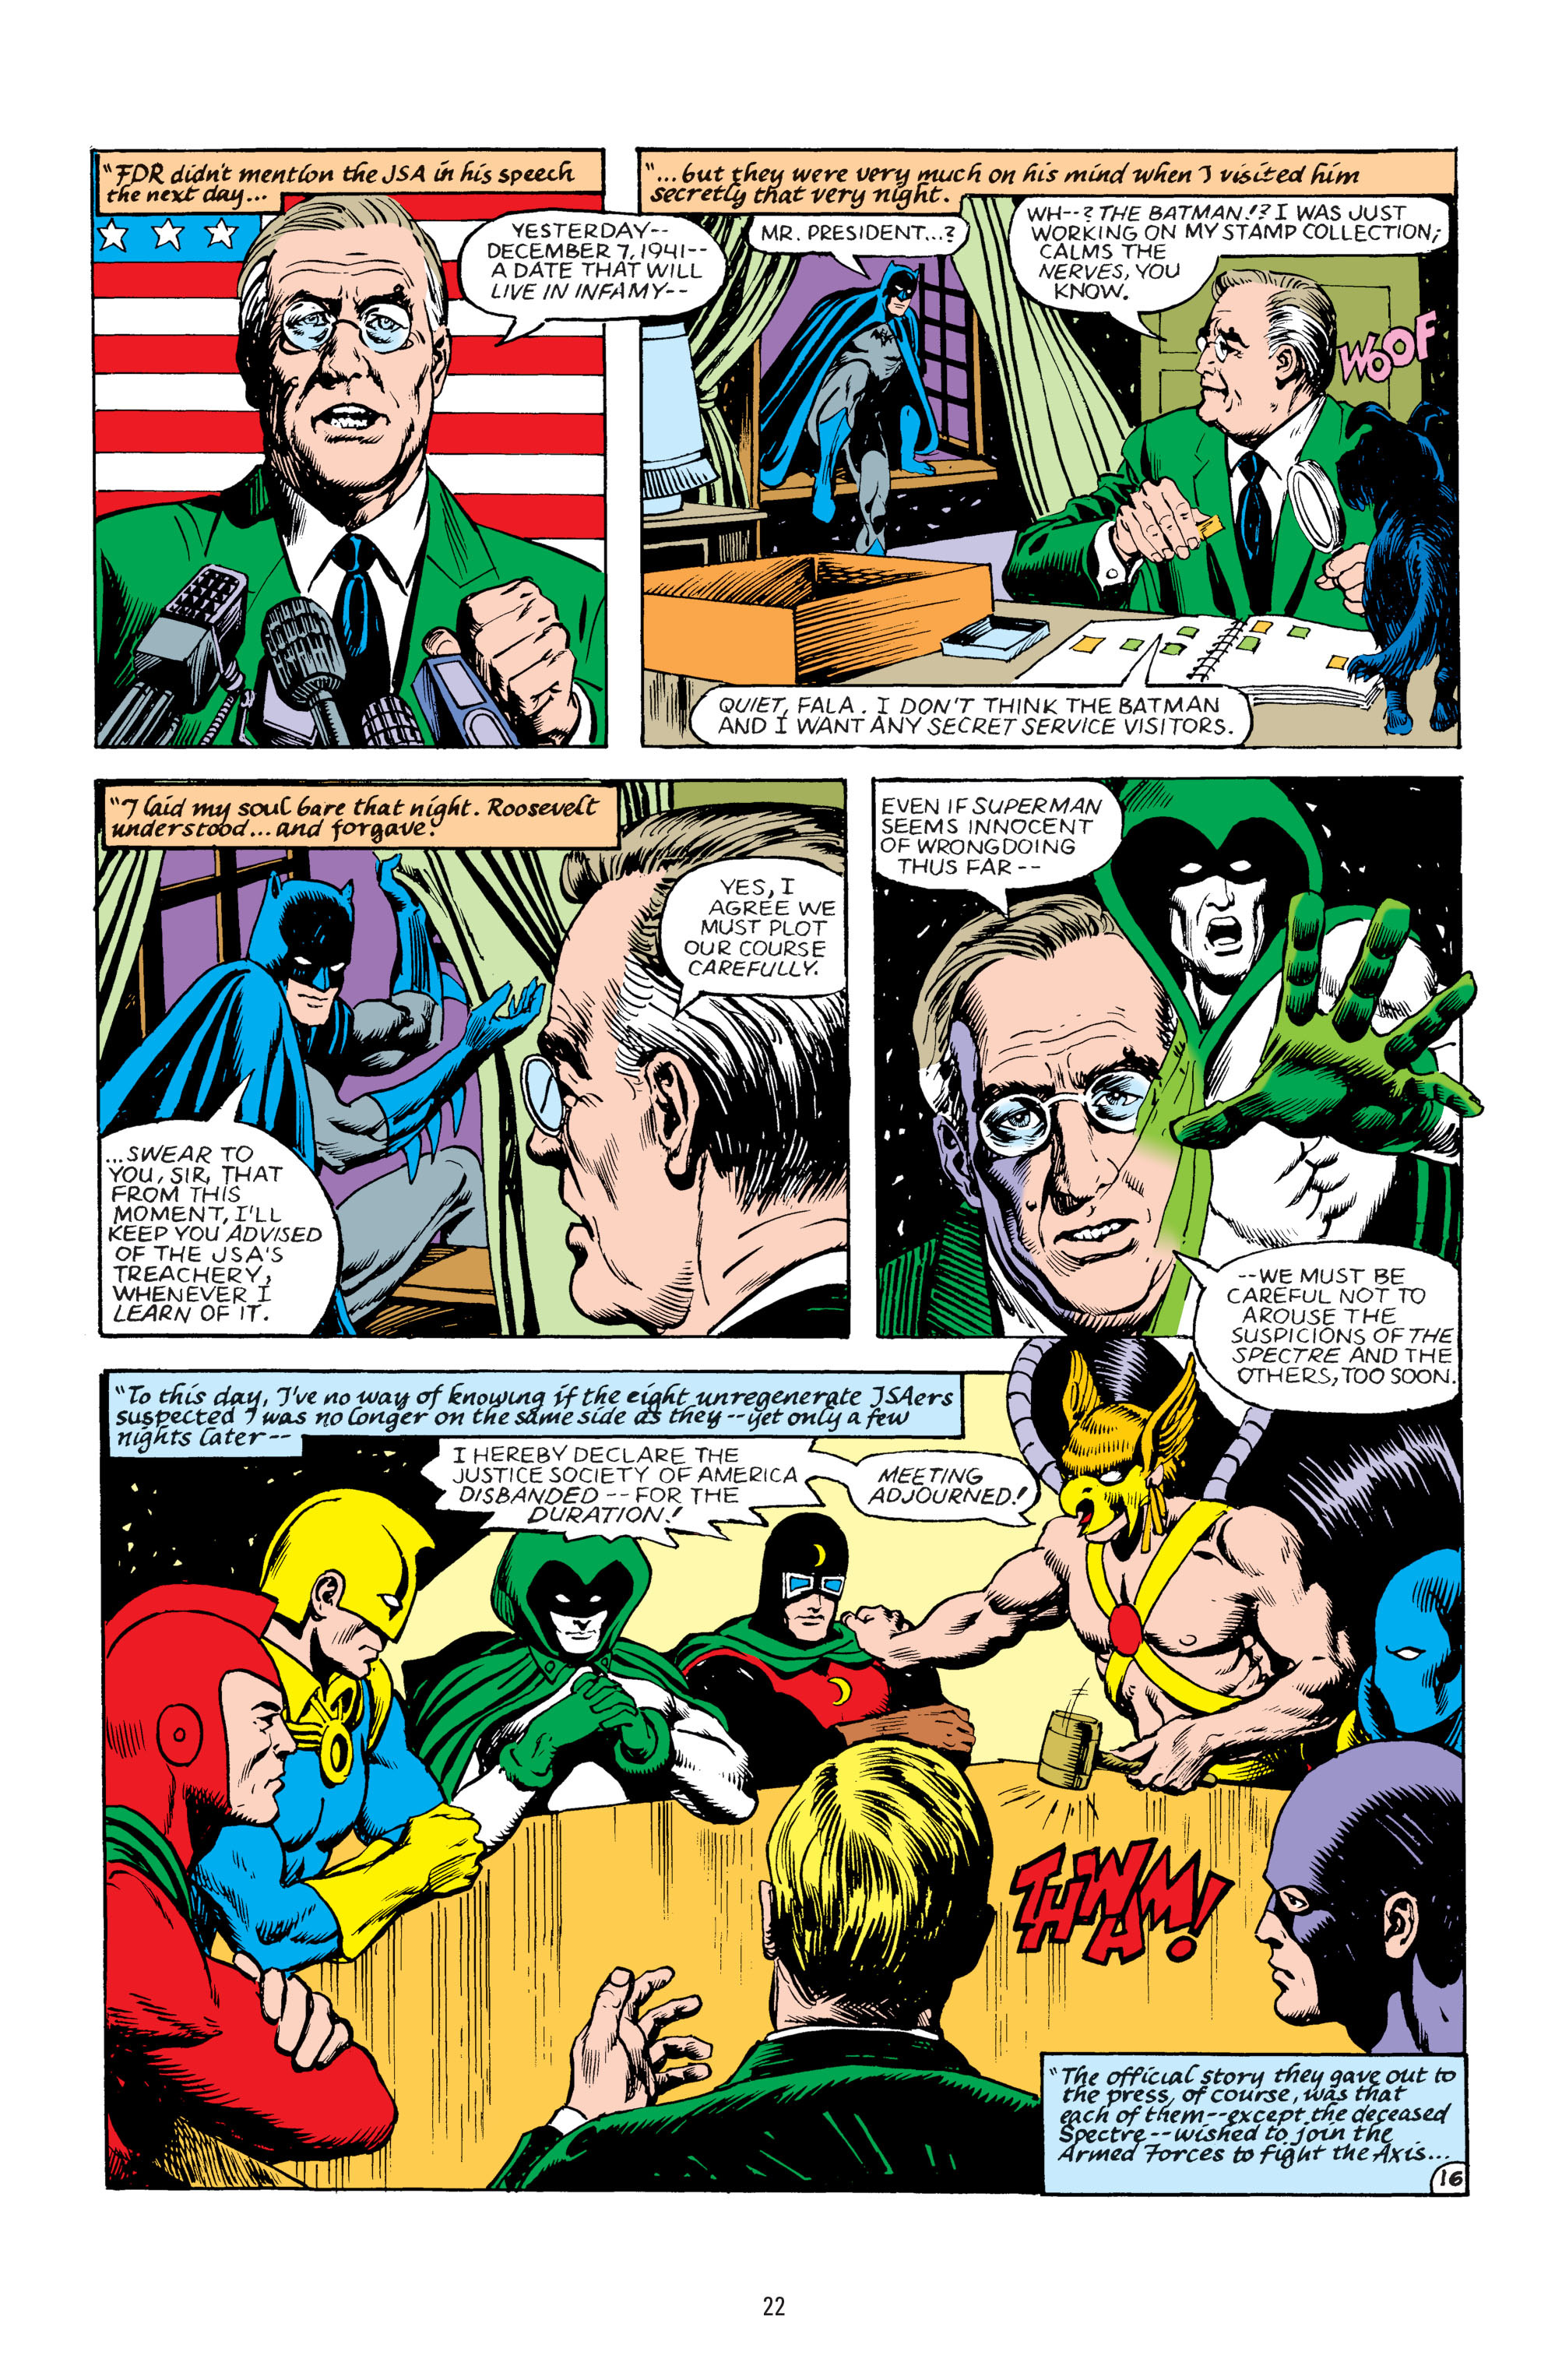 Read online America vs. the Justice Society comic -  Issue # TPB - 22